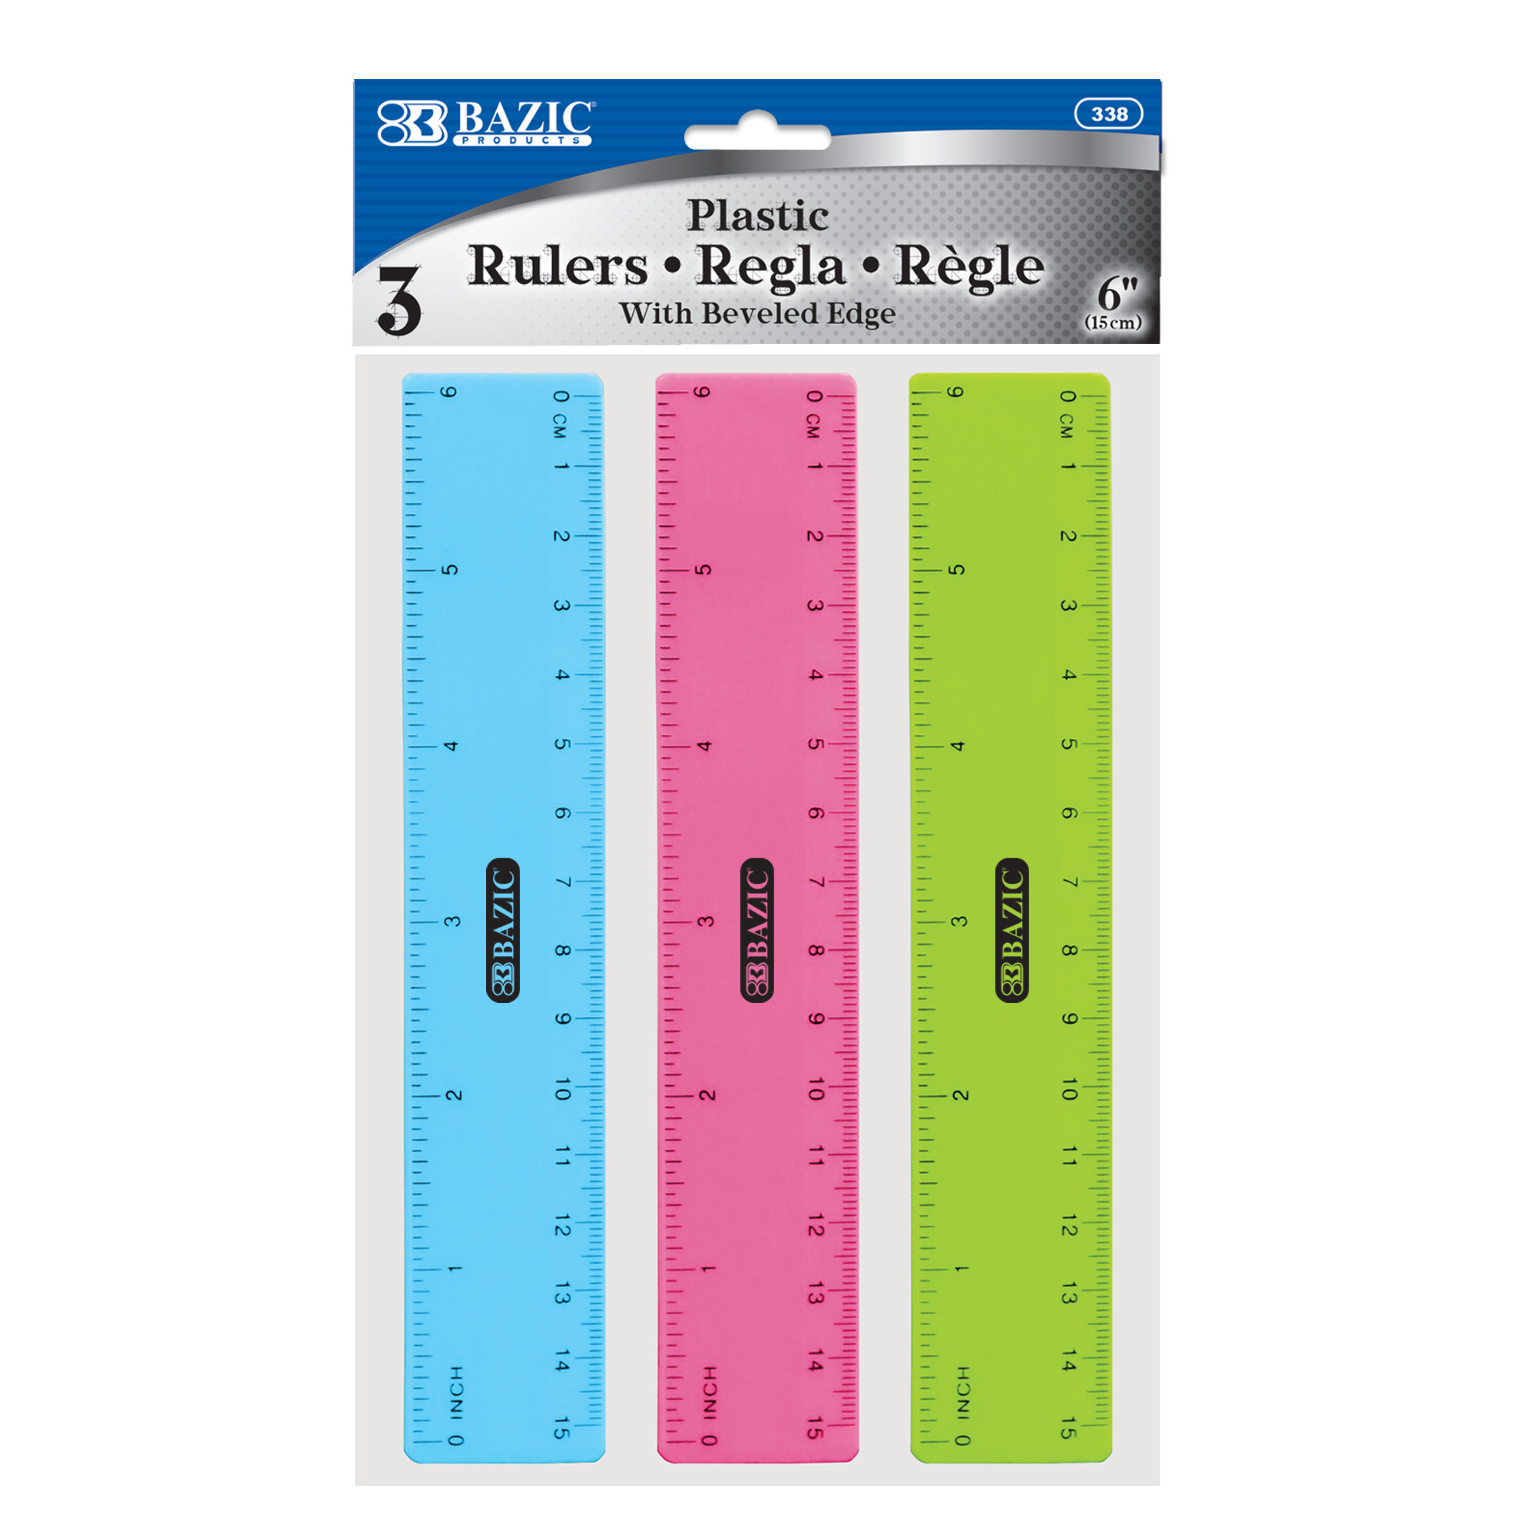 6 Plastic Rulers - 3 Pack, Assorted Colors